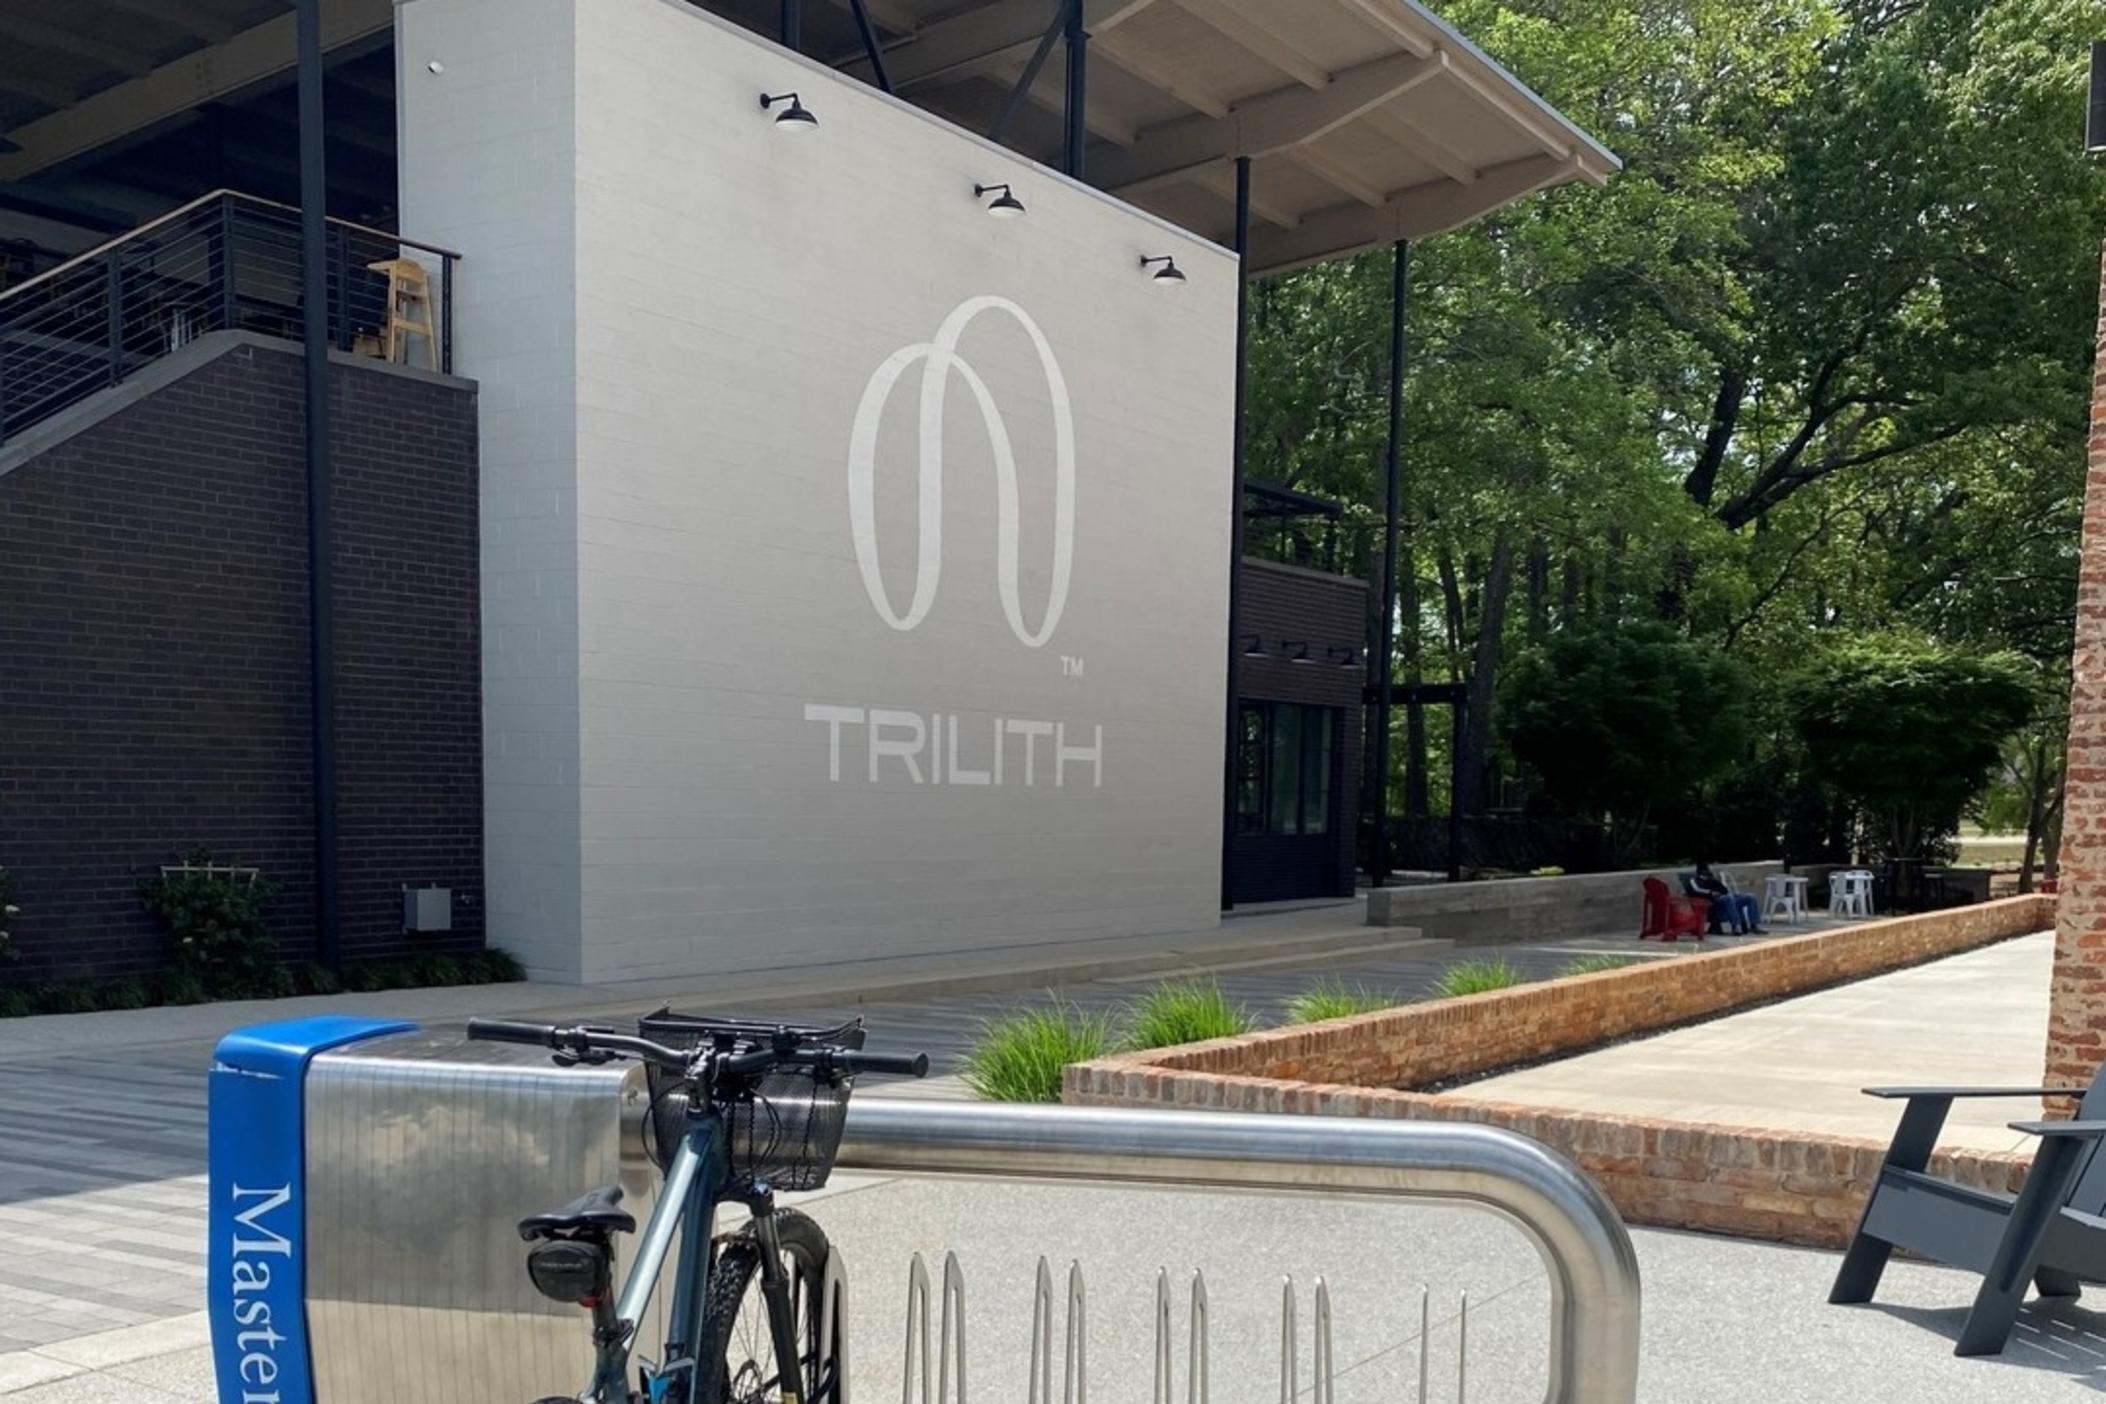 Town at Trilith and Trilith studios are facing a lawsuit from Black residents alleging years of discrimination going unaddressed.